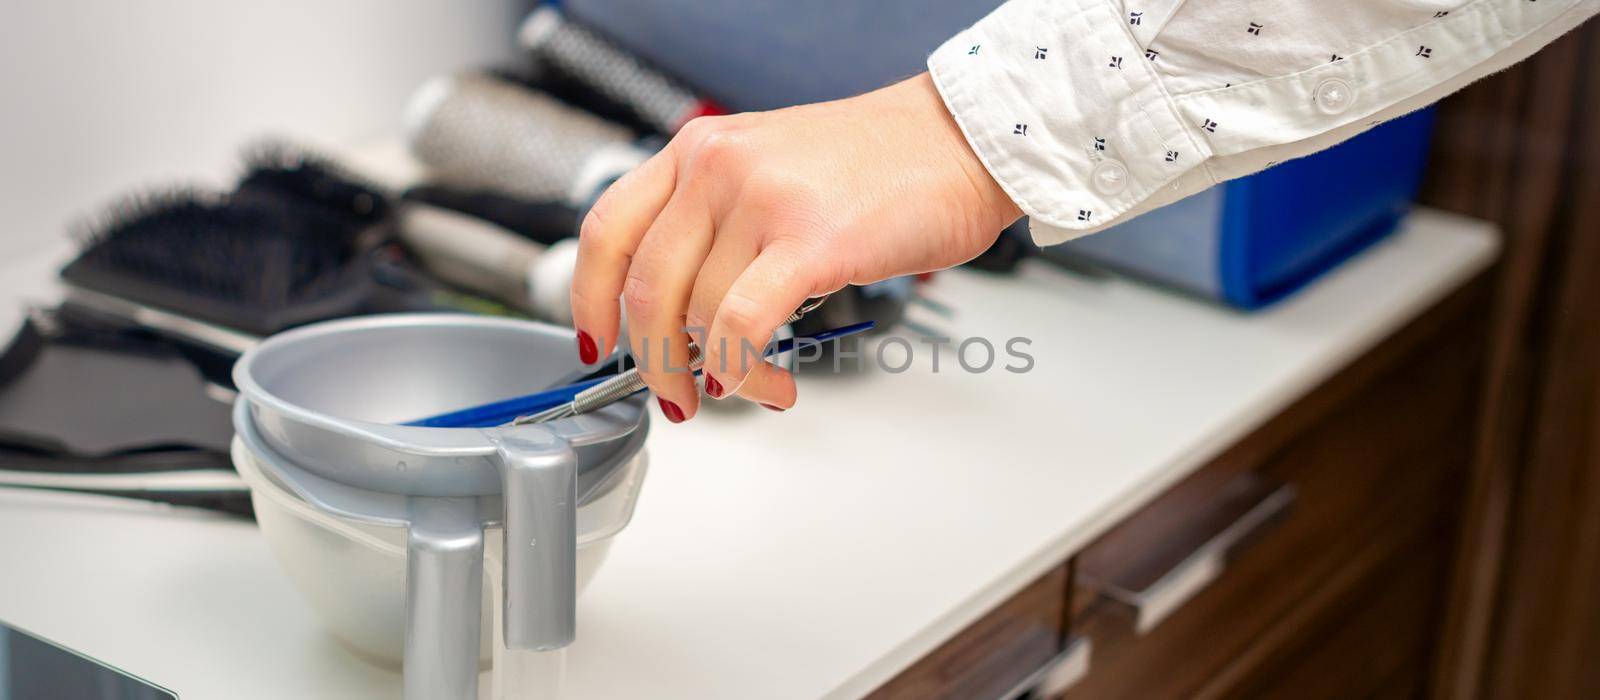 Hand of hairstylist prepares dye in bowl for coloring hair in hairdress salon